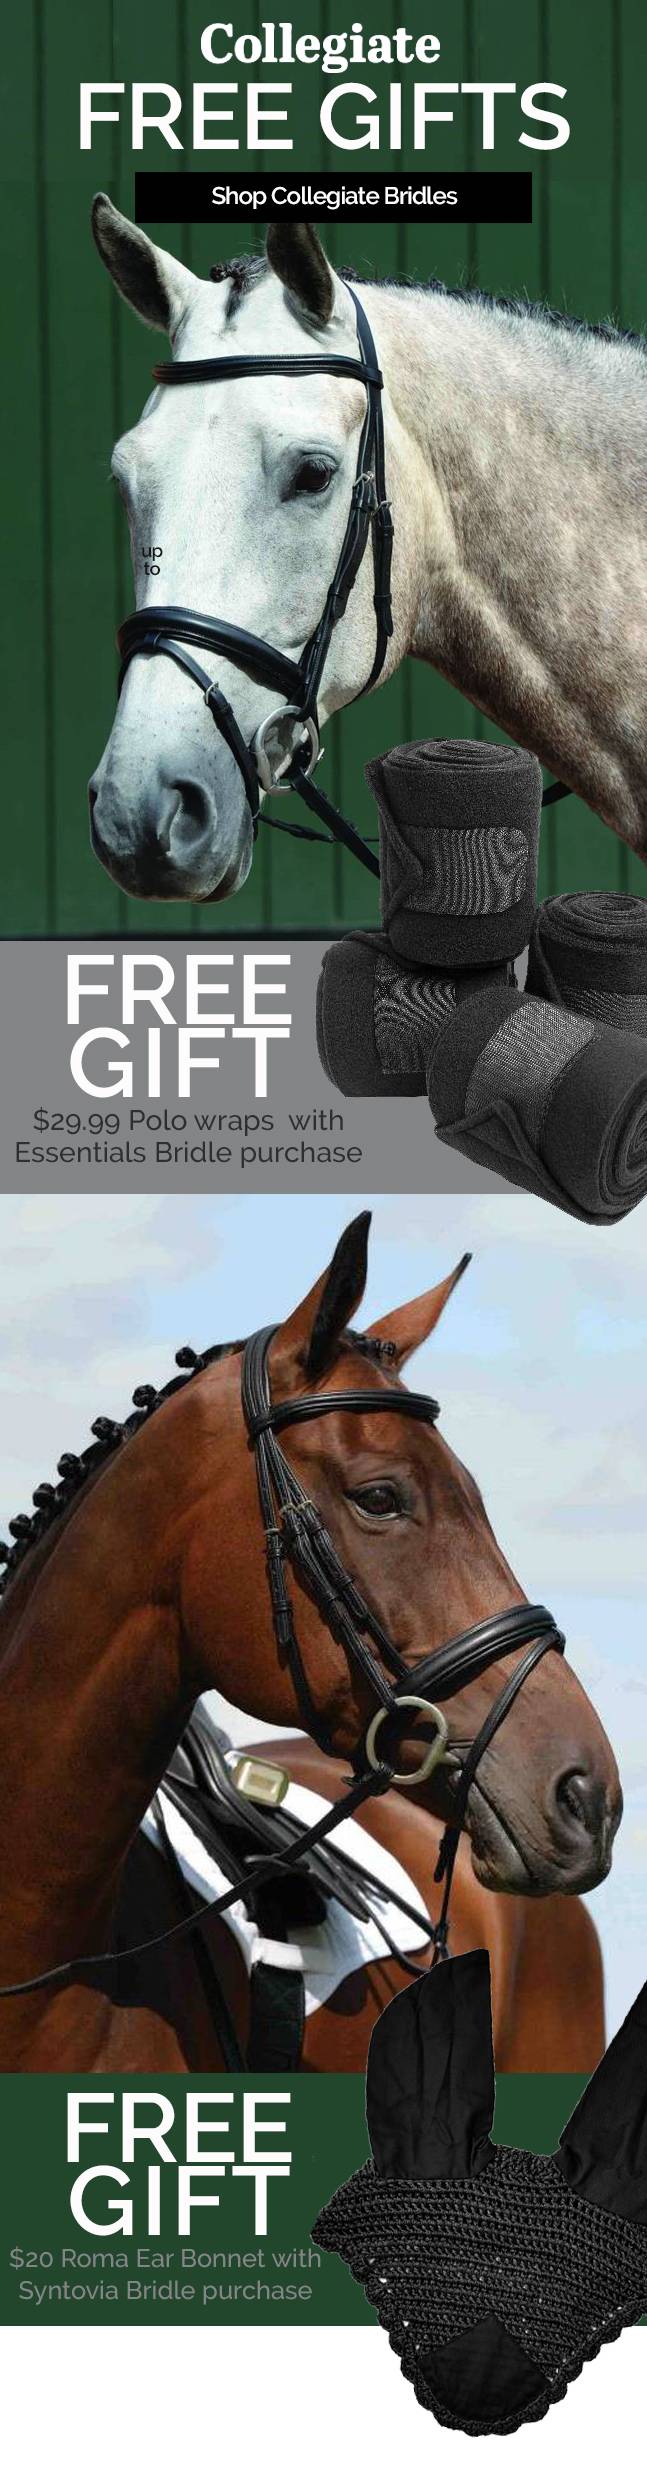 Collegiate Bridle Sale - FREE Gift with Select Bridles